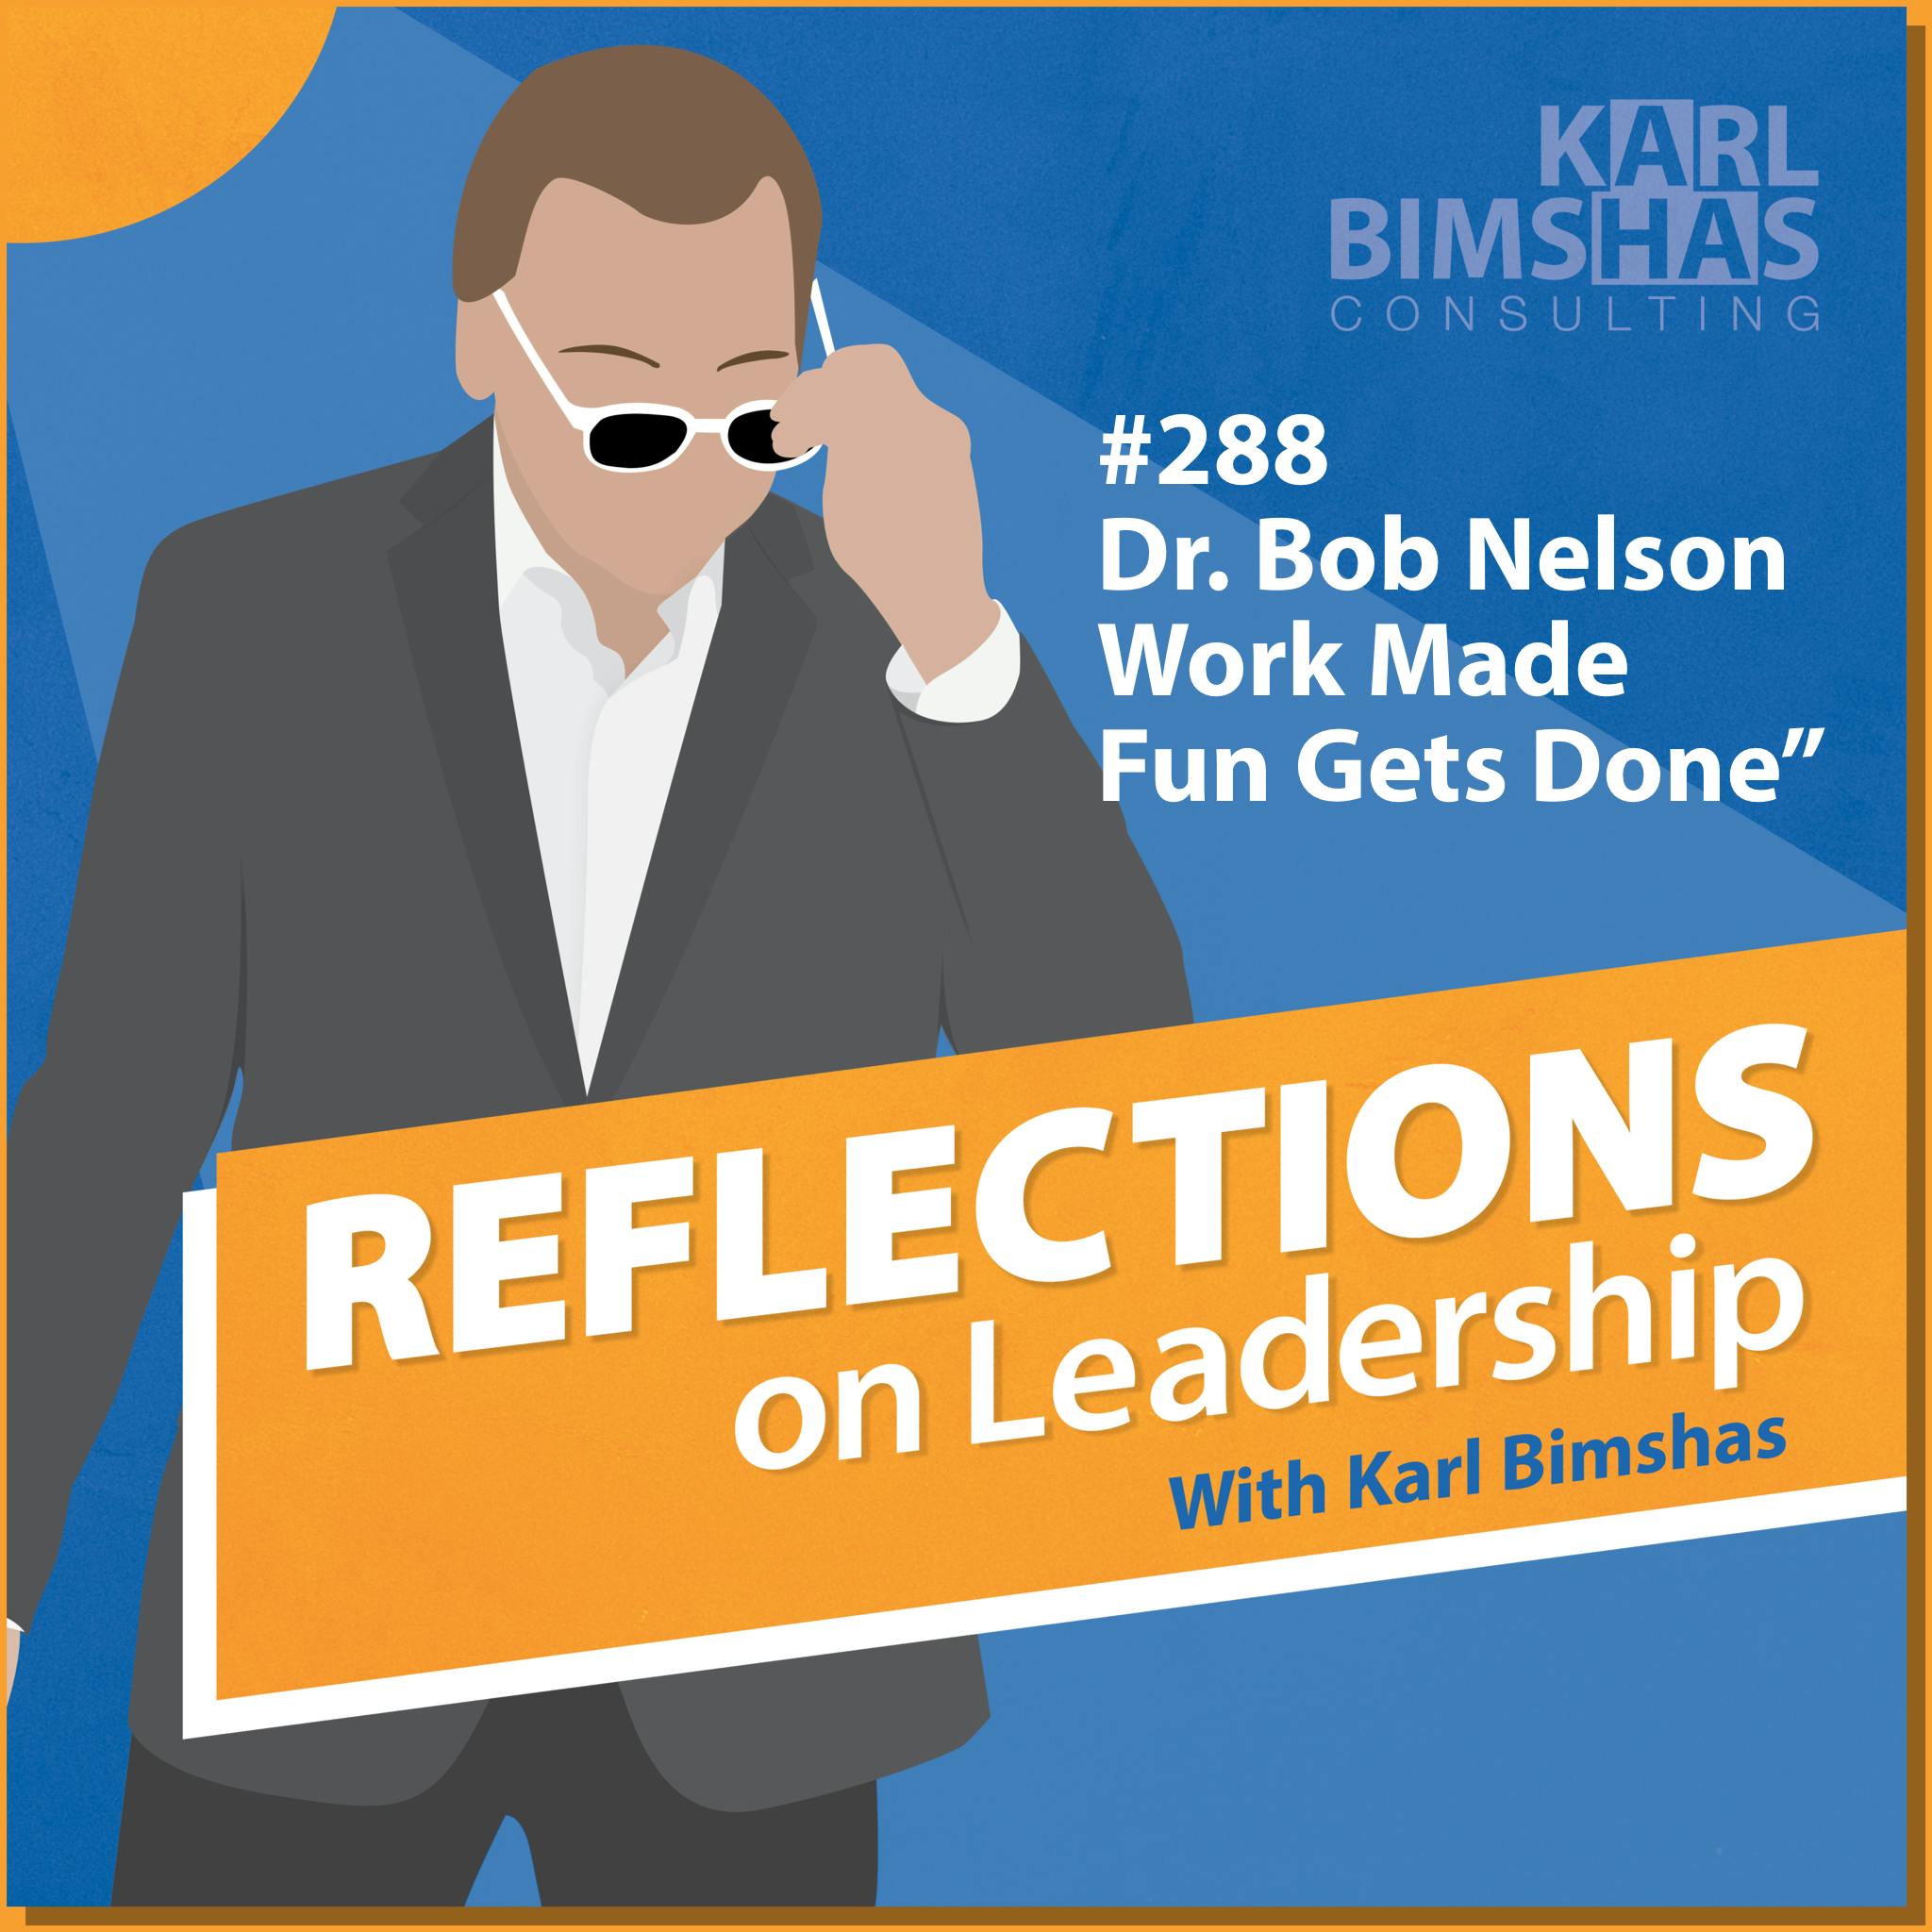 Karl Bimshas and Dr. Bob Nelson Reflections on Leadership Podcast